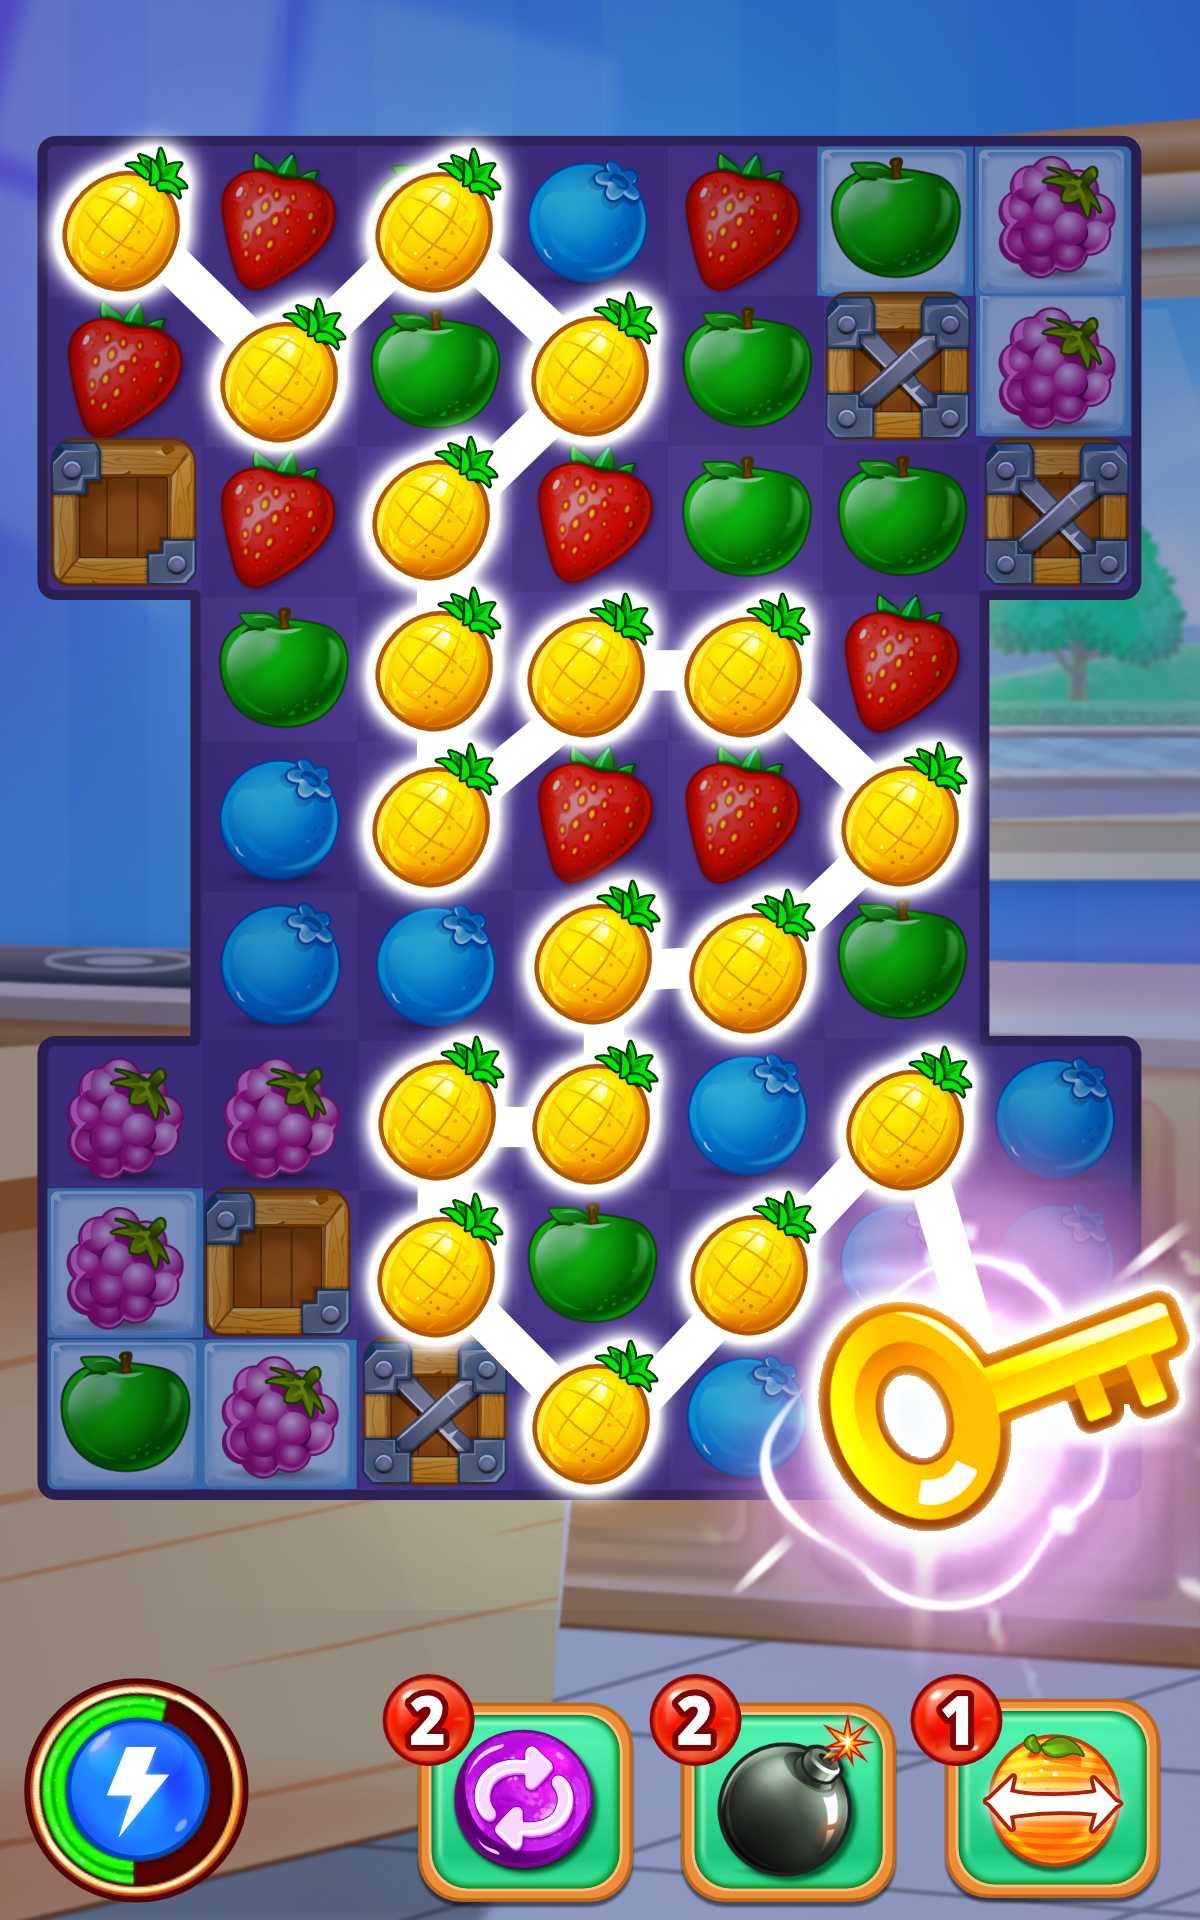 Balloon Paradise - Match 3 Puzzle Game free